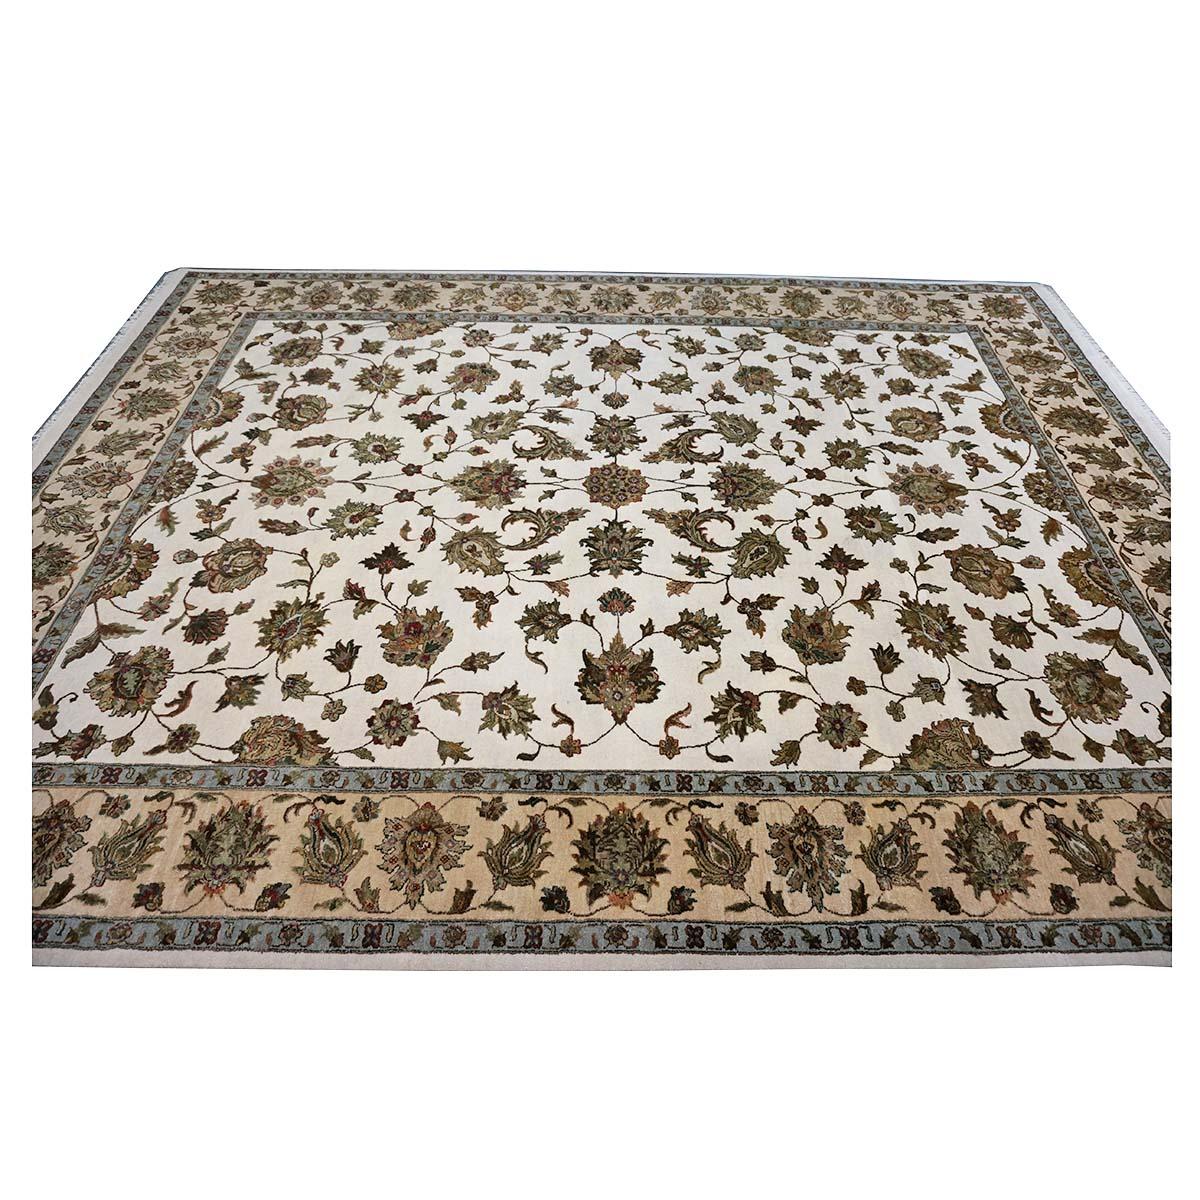 Contemporary Indian Tabriz Wool & Silk 9x12 White Ivory, Tan, Blue, & Green Handmade Area Rug For Sale